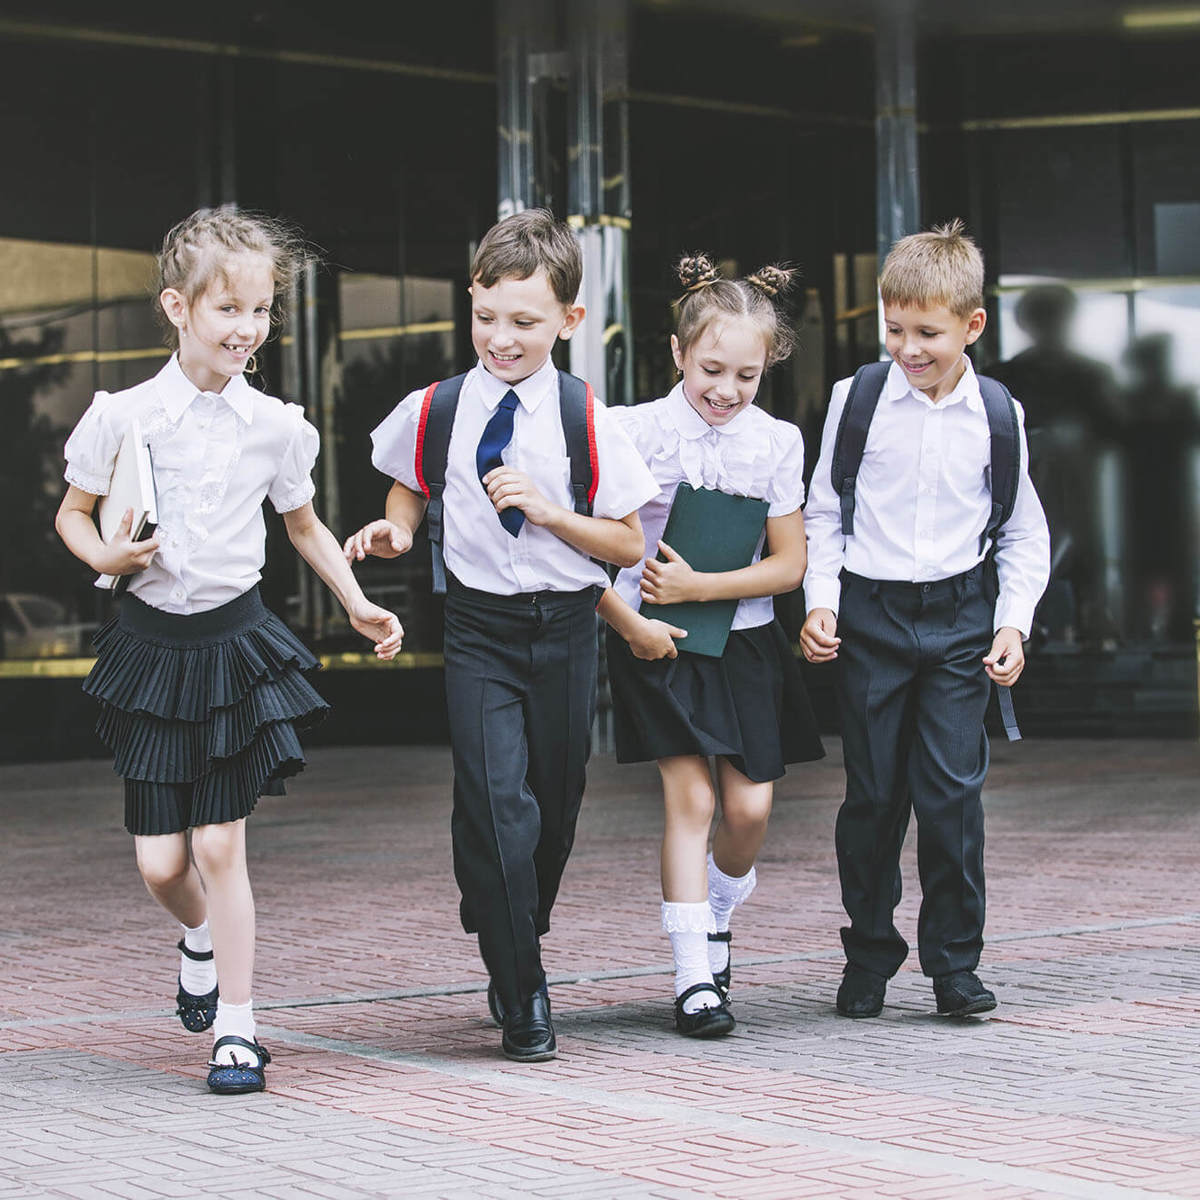 school-environment young pupils walking together